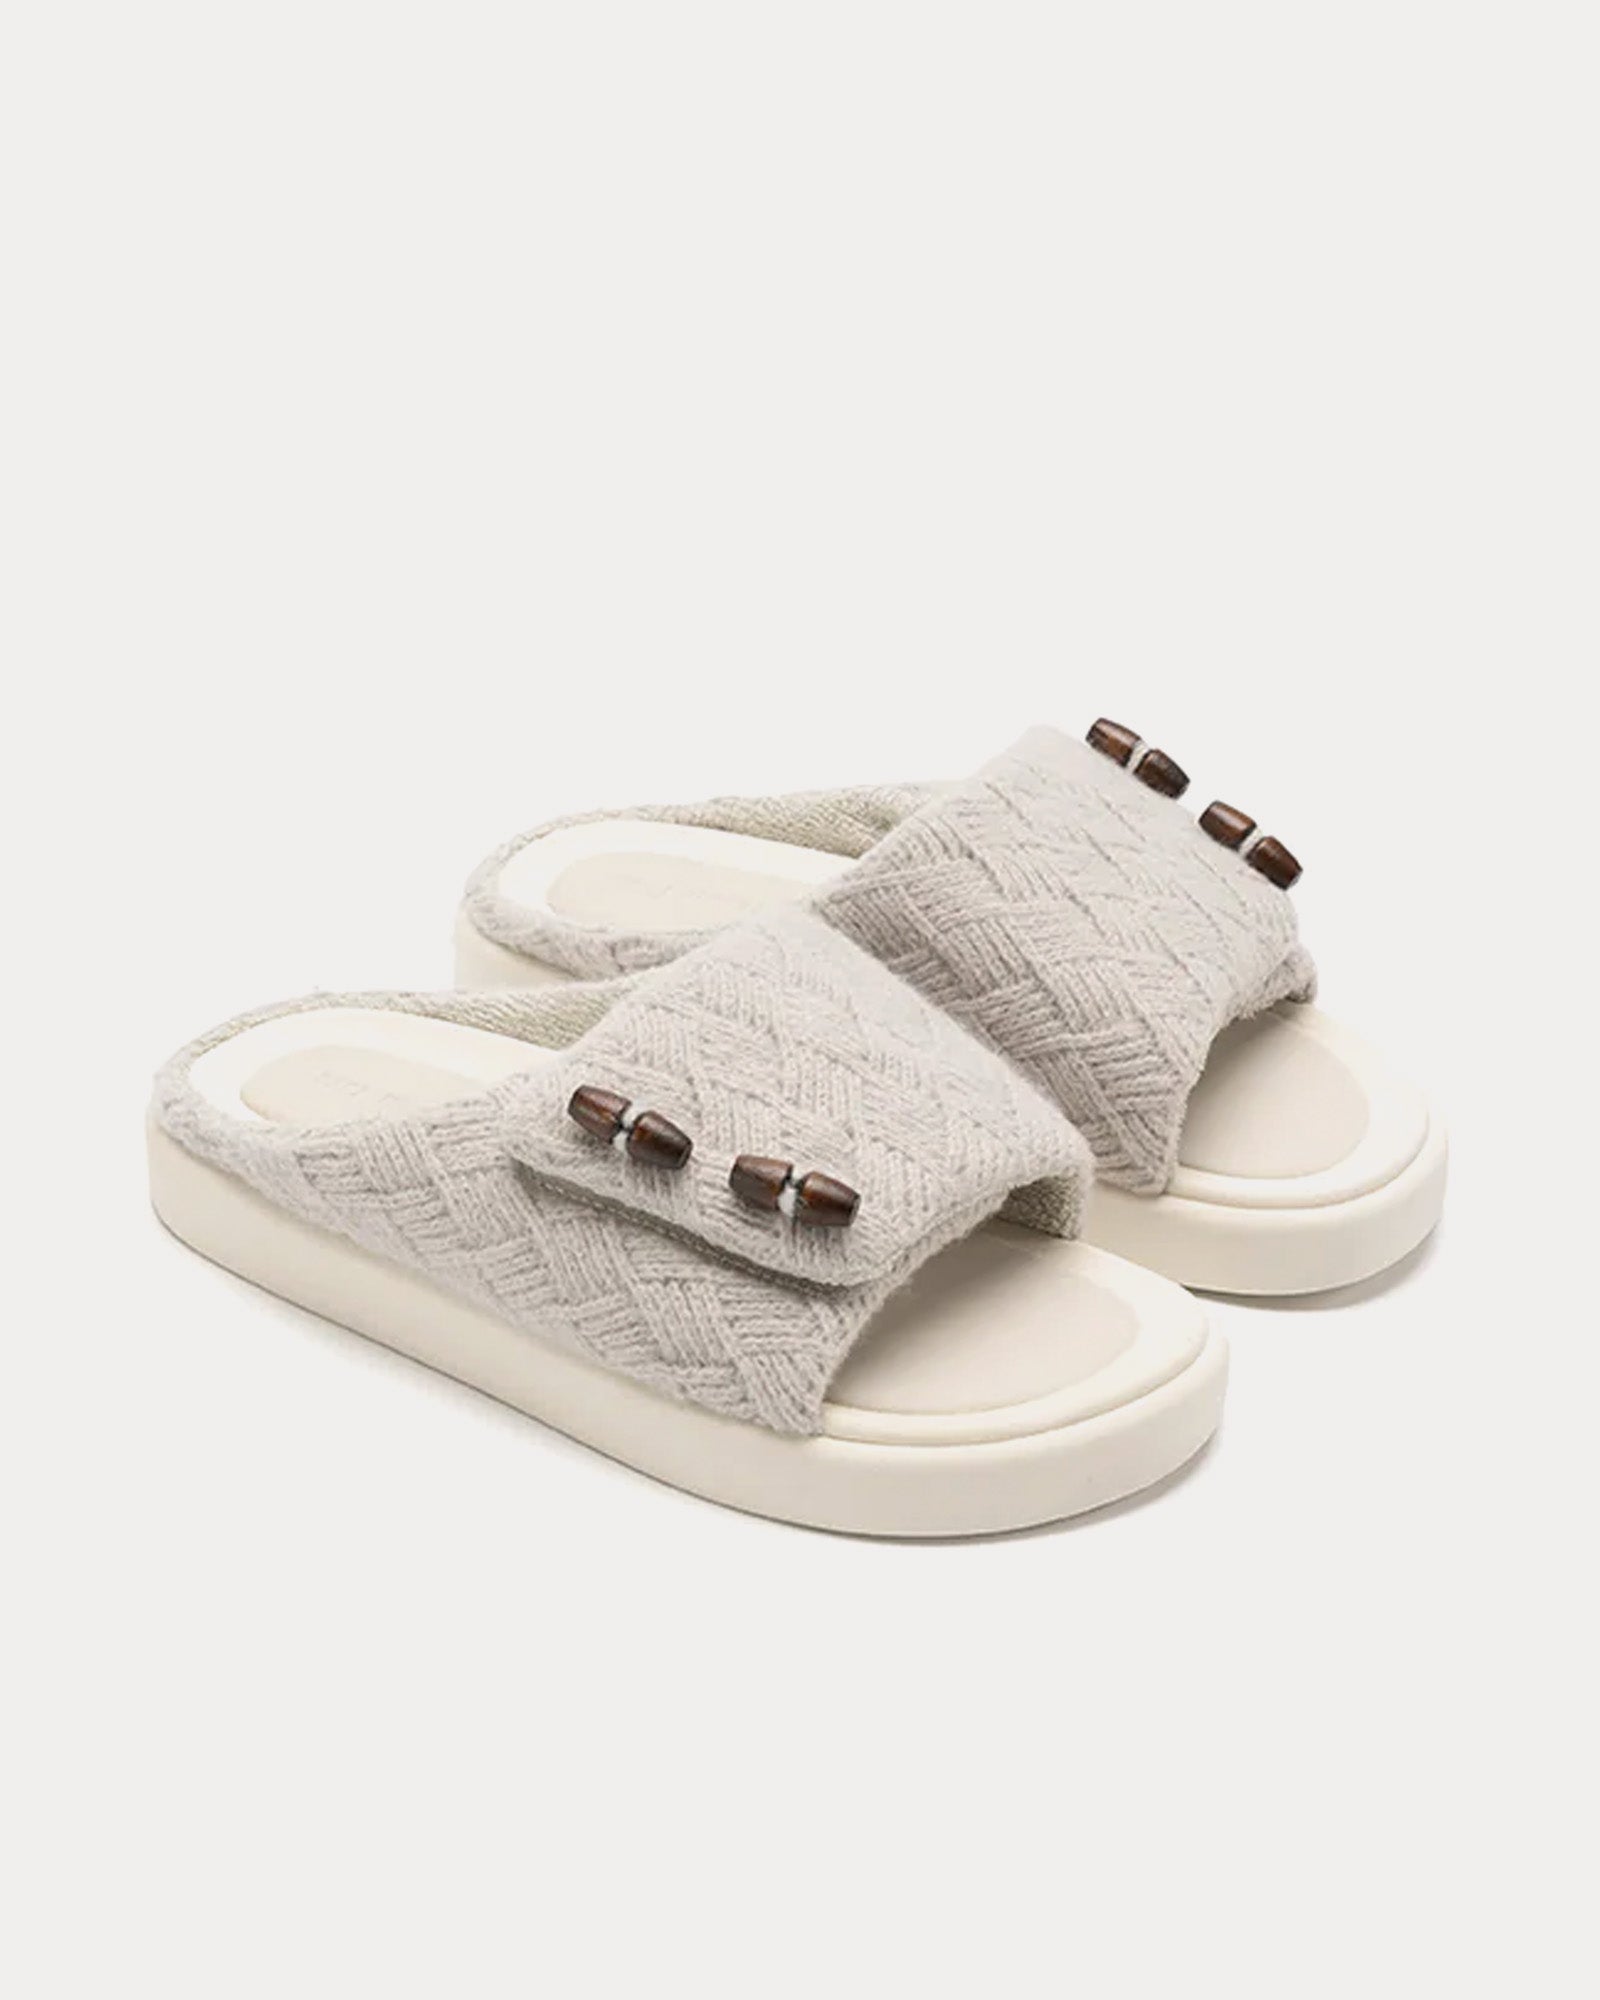 Foot Industry - Knitting Cream White Sandals